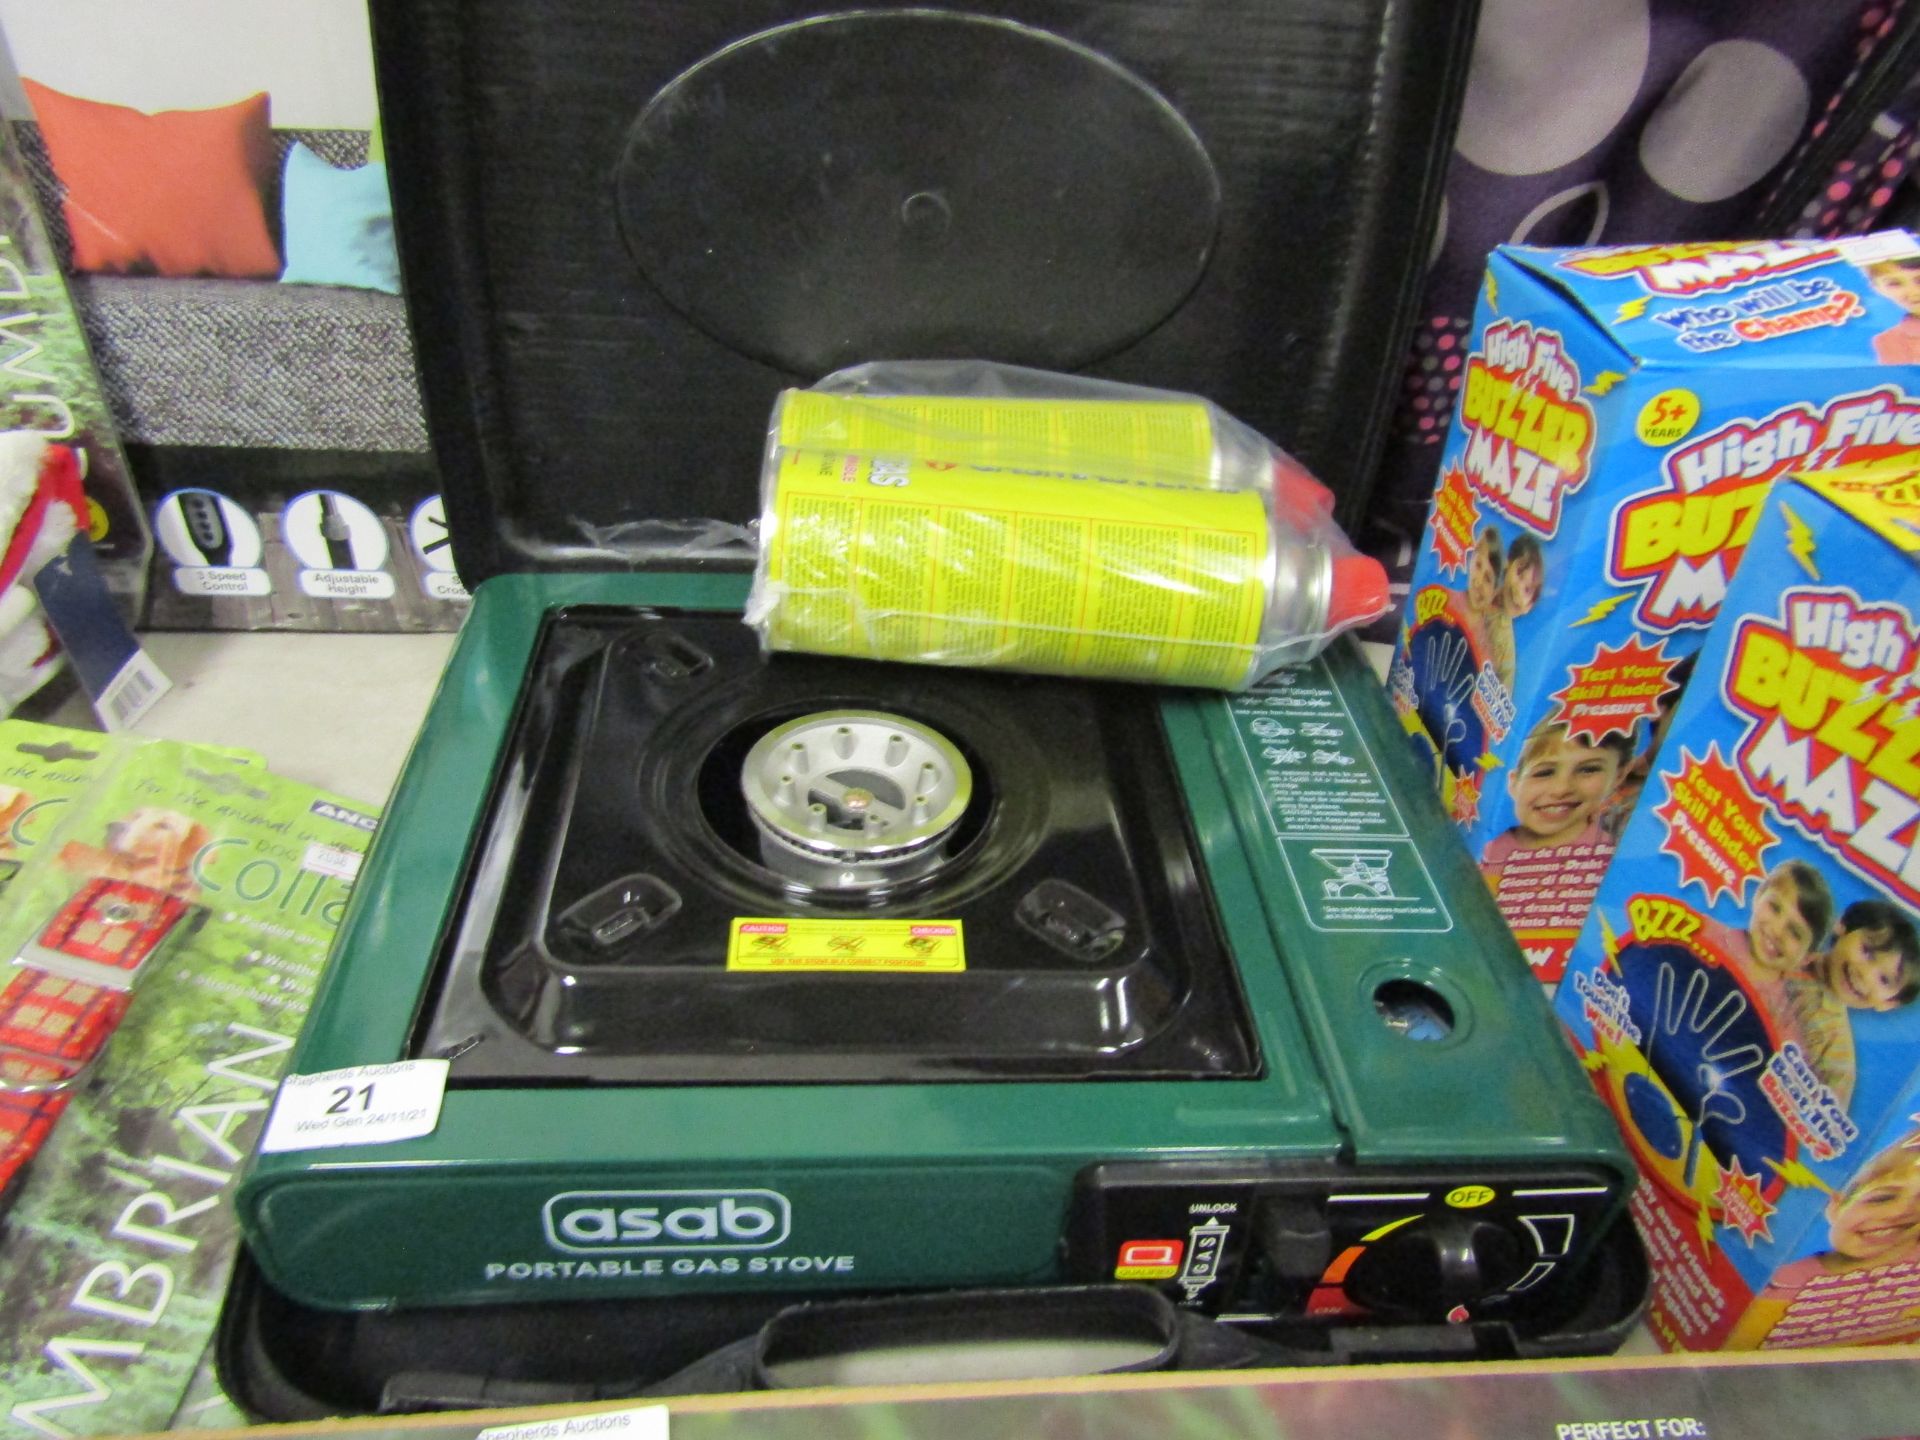 1 x Asab Portable Gas Stove packaged & 2 x 227g Butane Gas Cannisters looks new & packaged